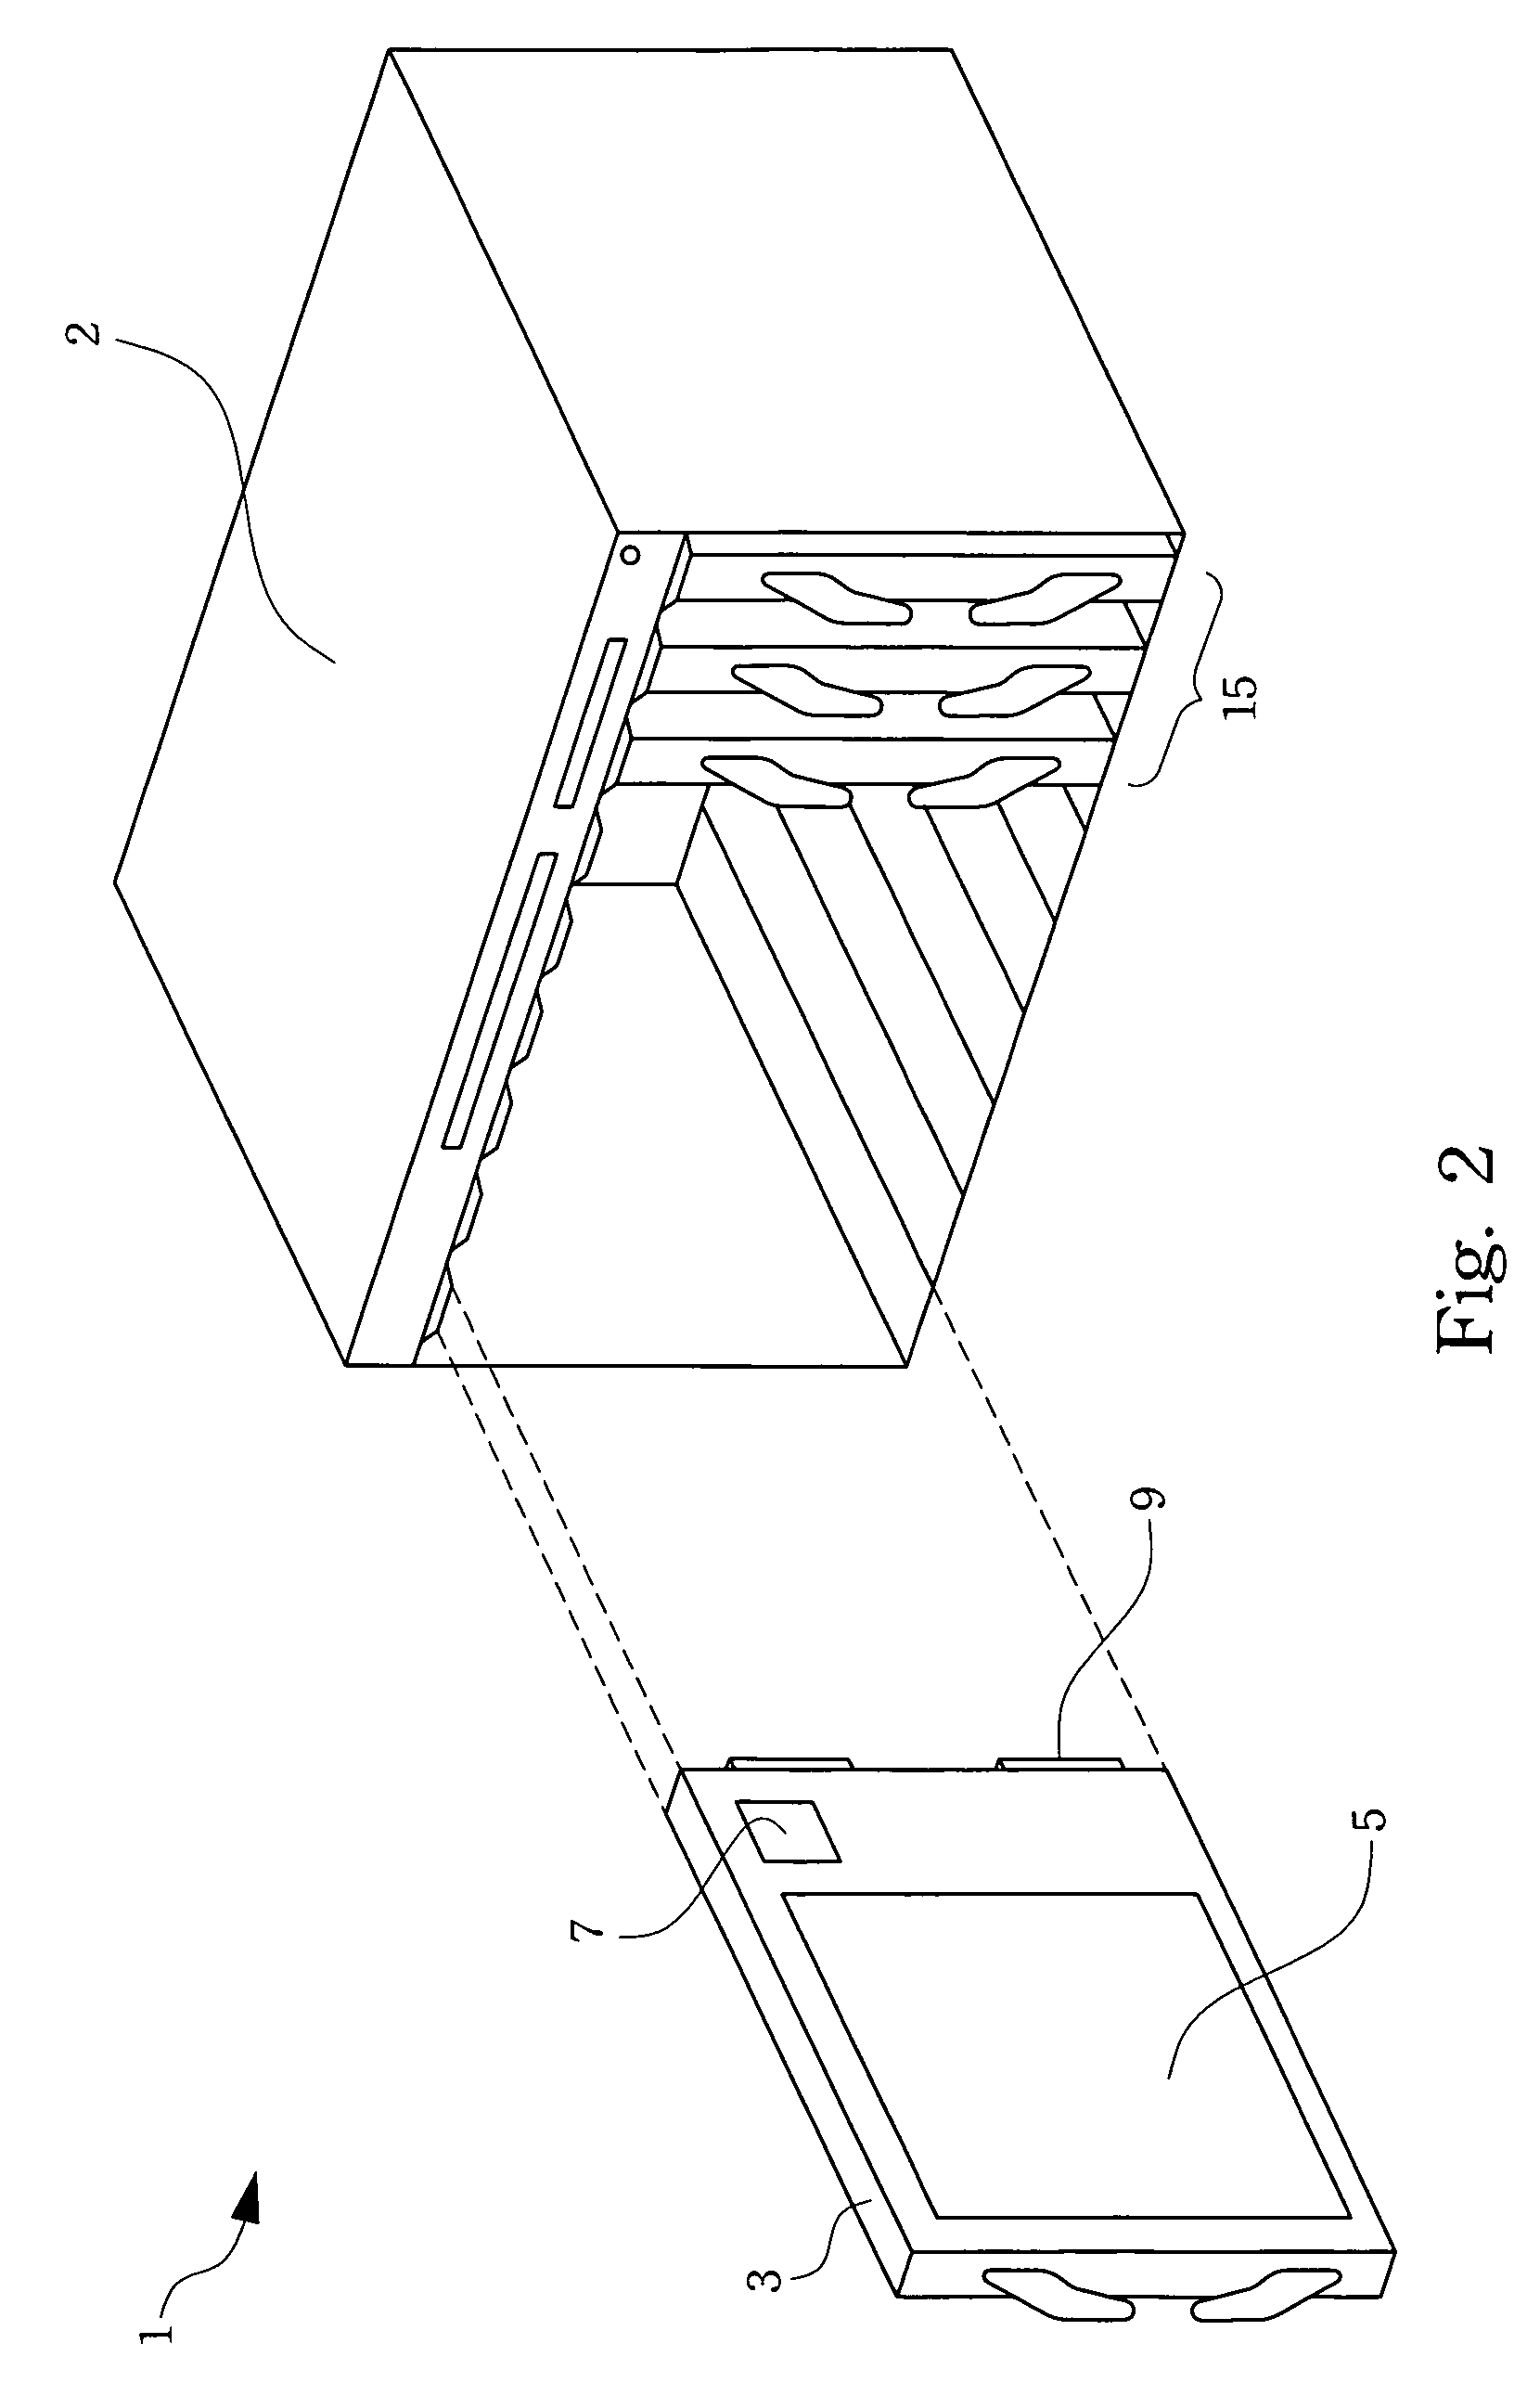 Expandable storage apparatus for blade server system